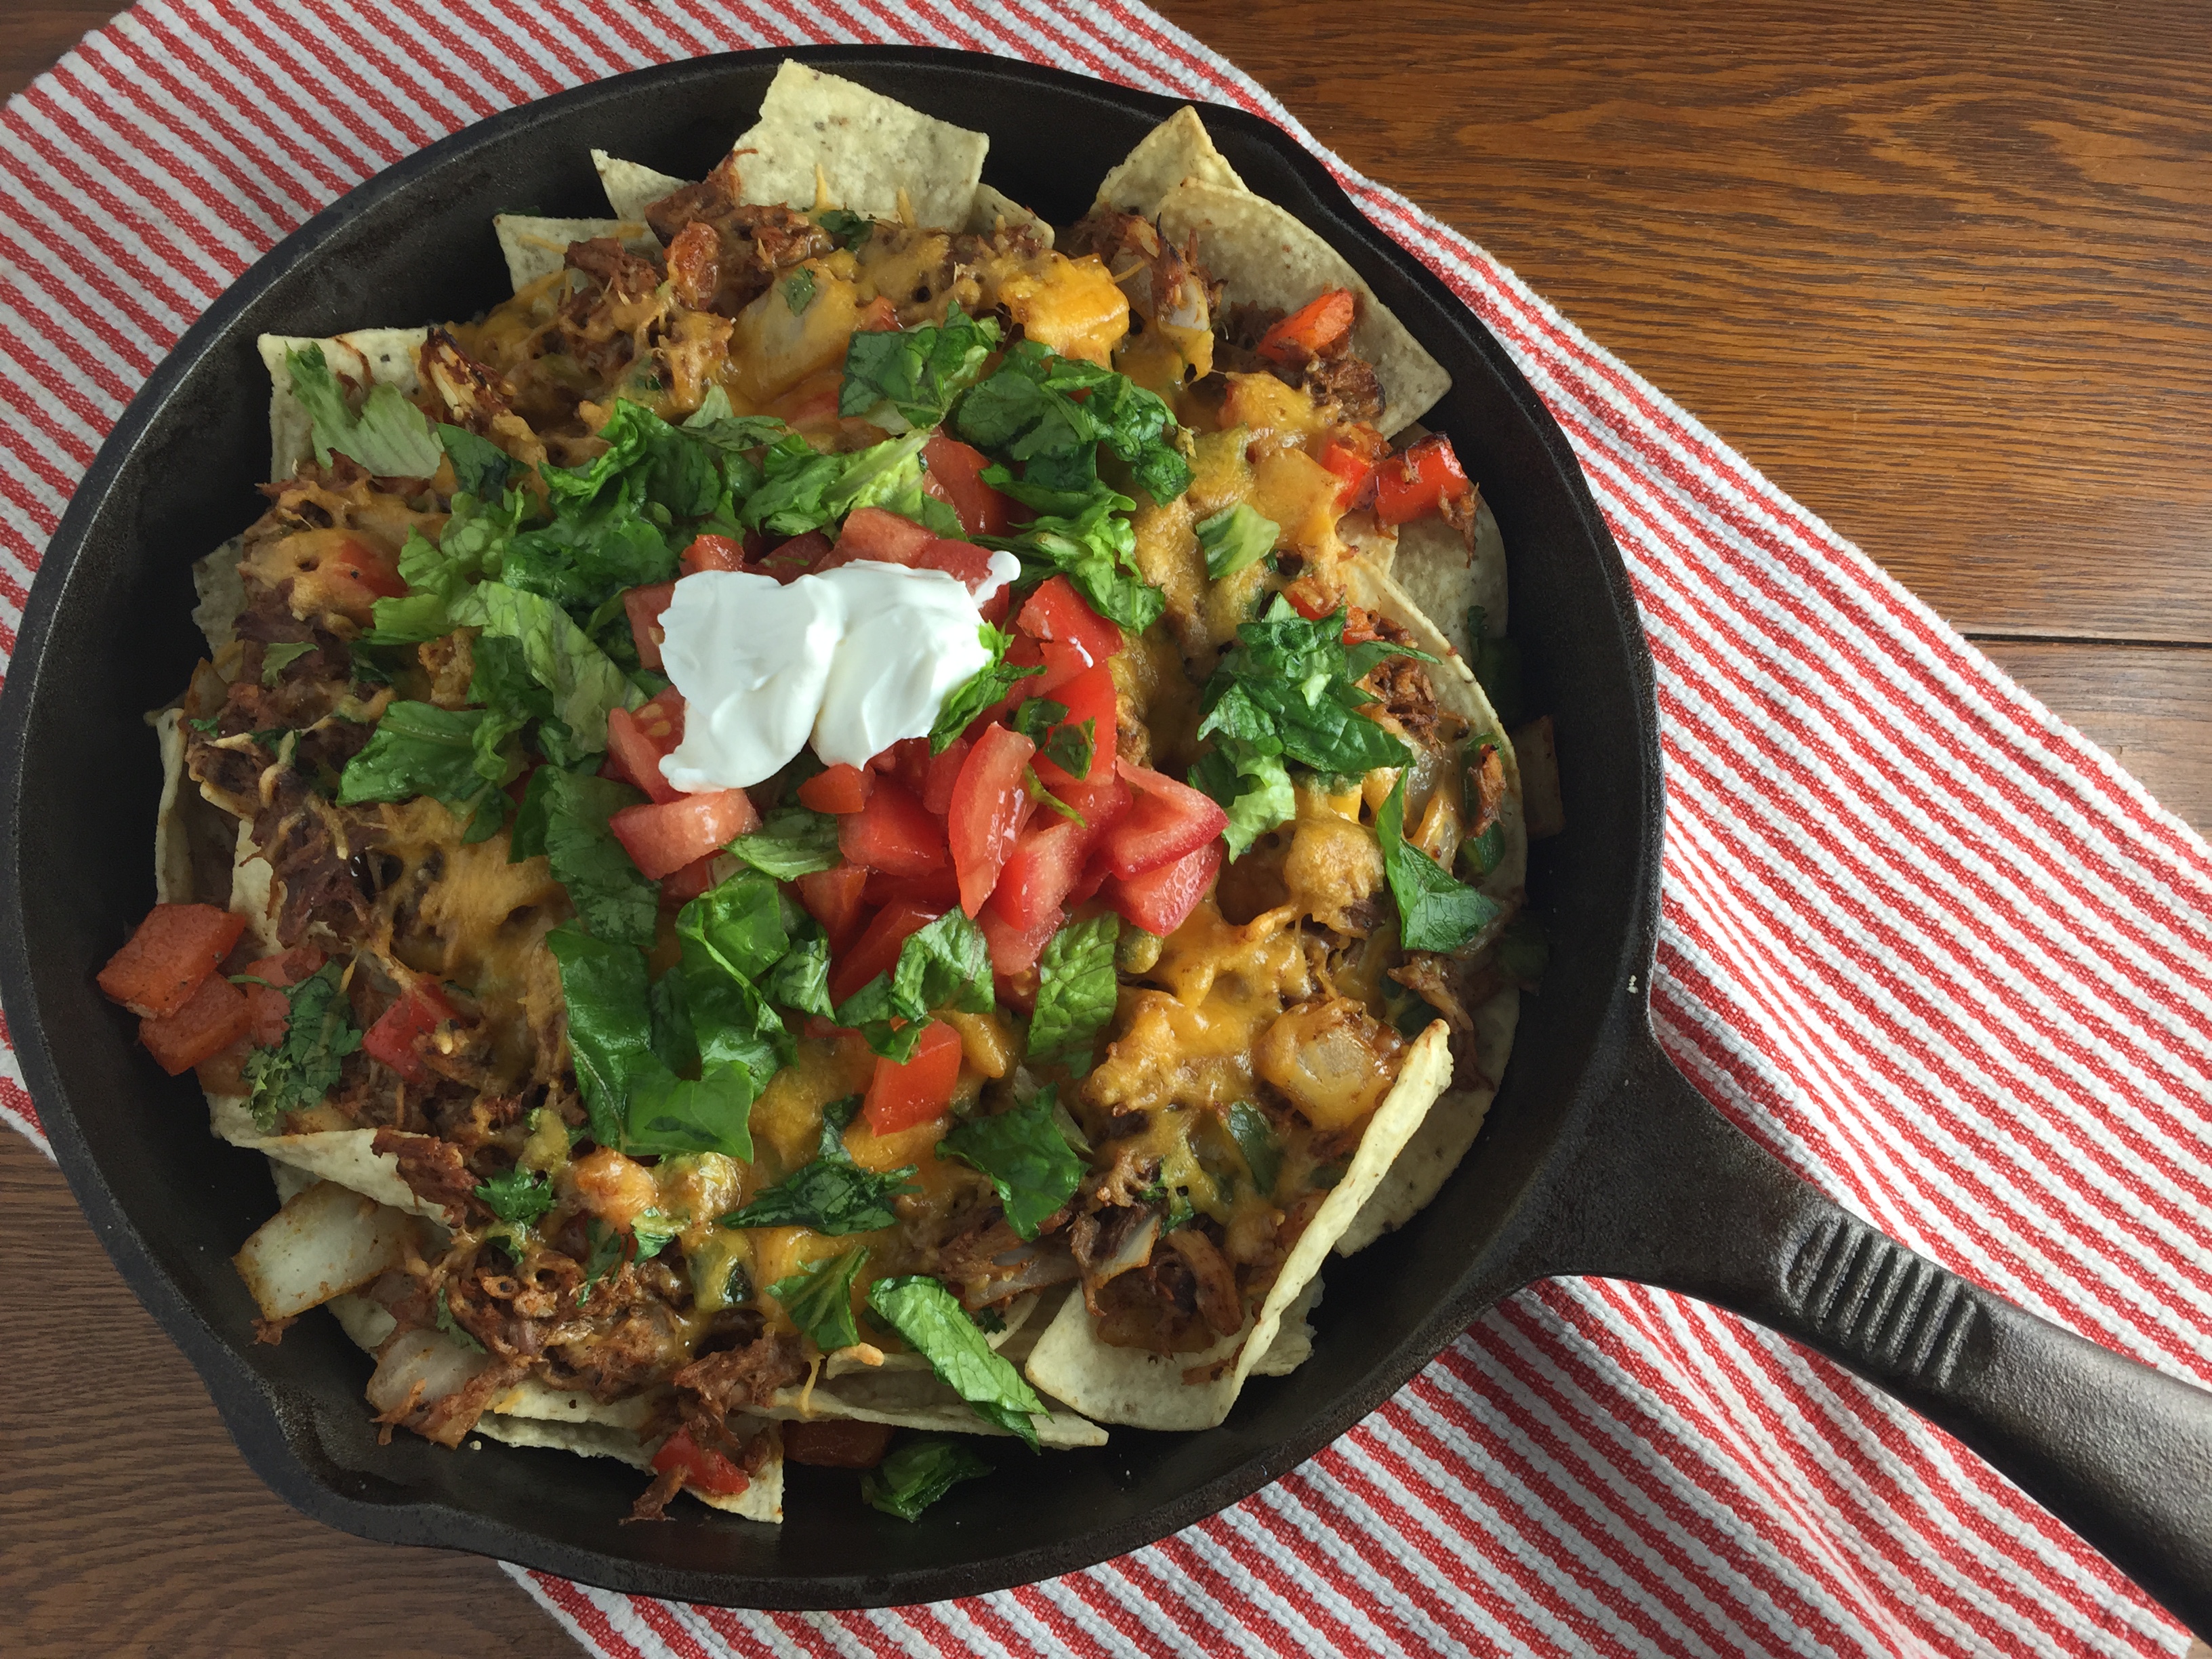 Pulled pork nachos recipe from Cooking with Vinyl